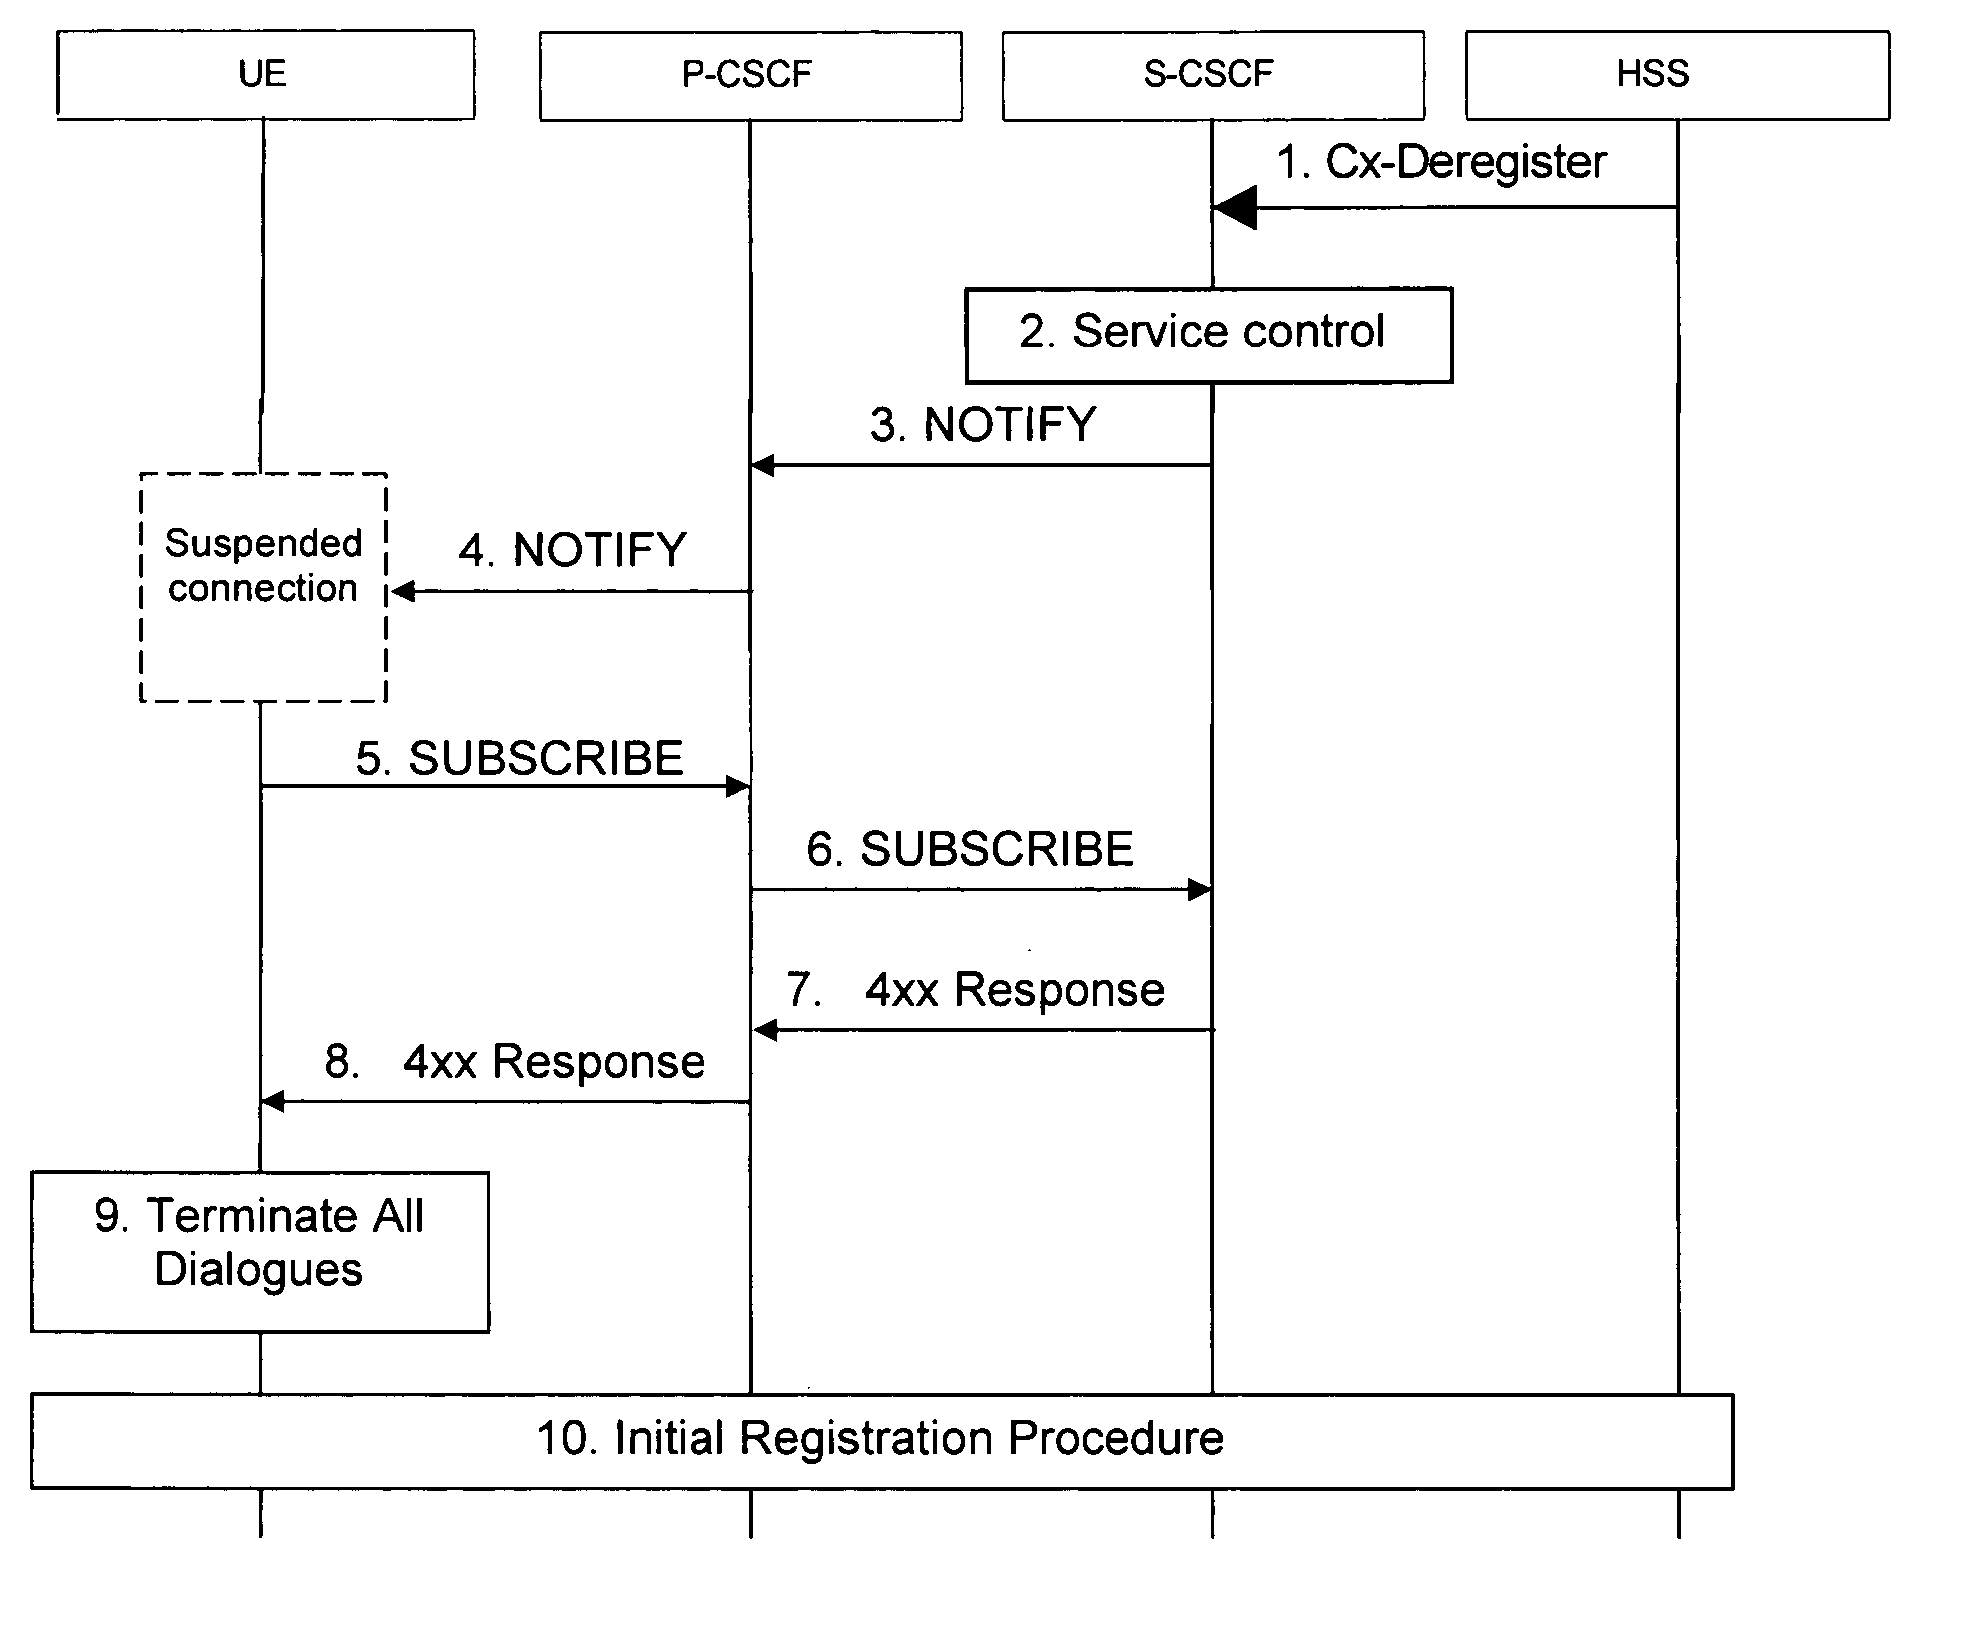 Handling suspended network state of a terminal device